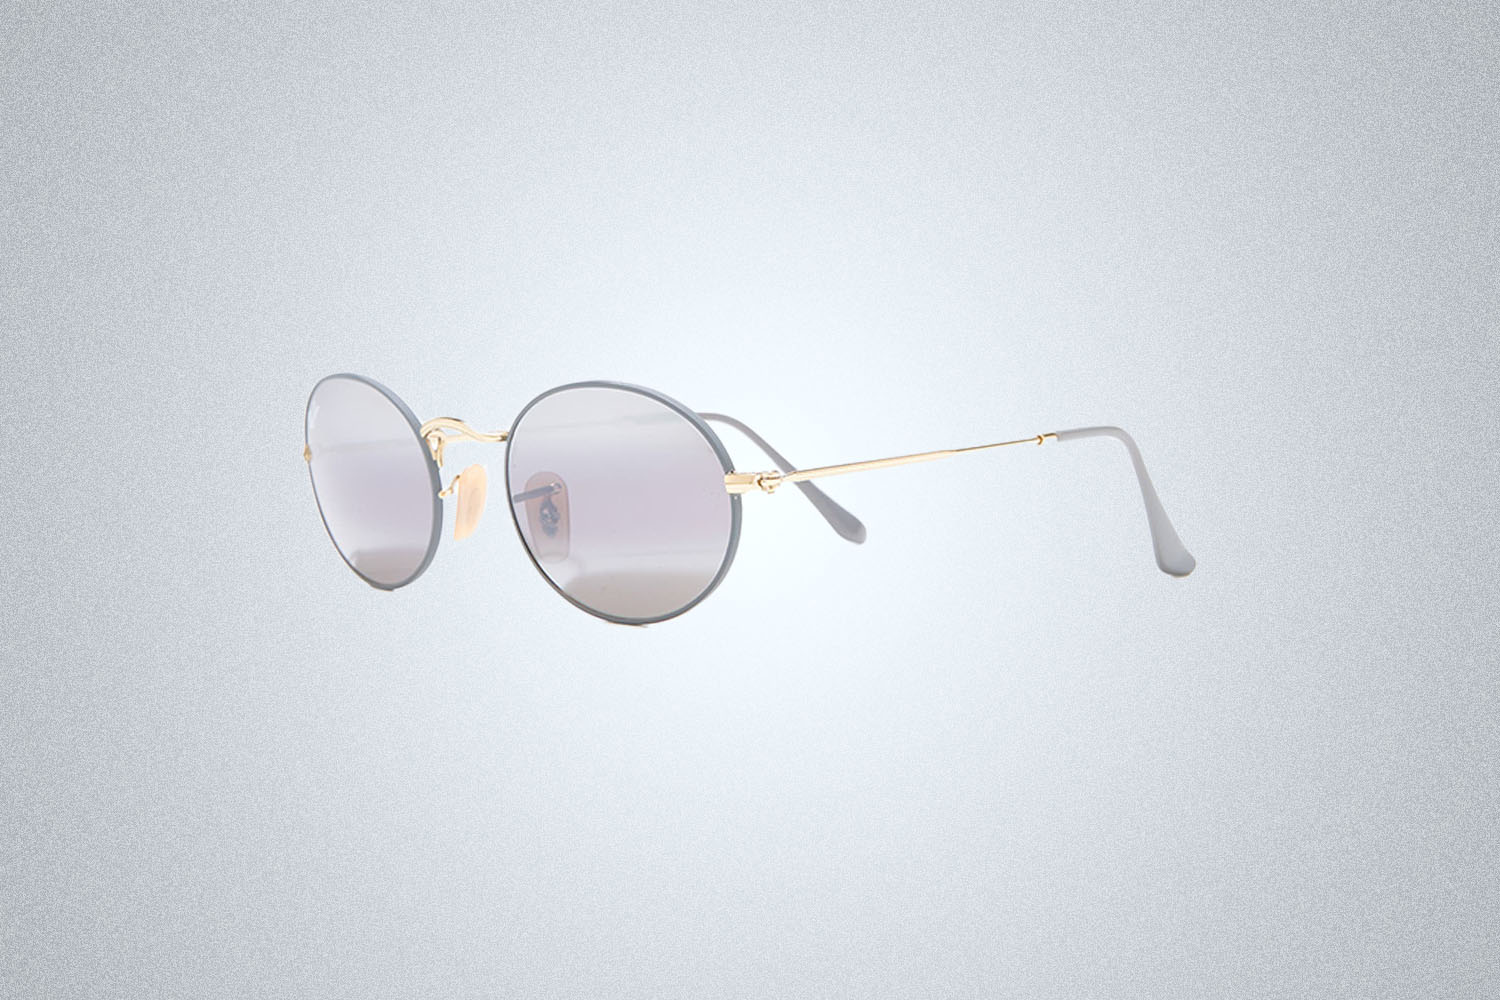 A pair of sunglasses on a grey background